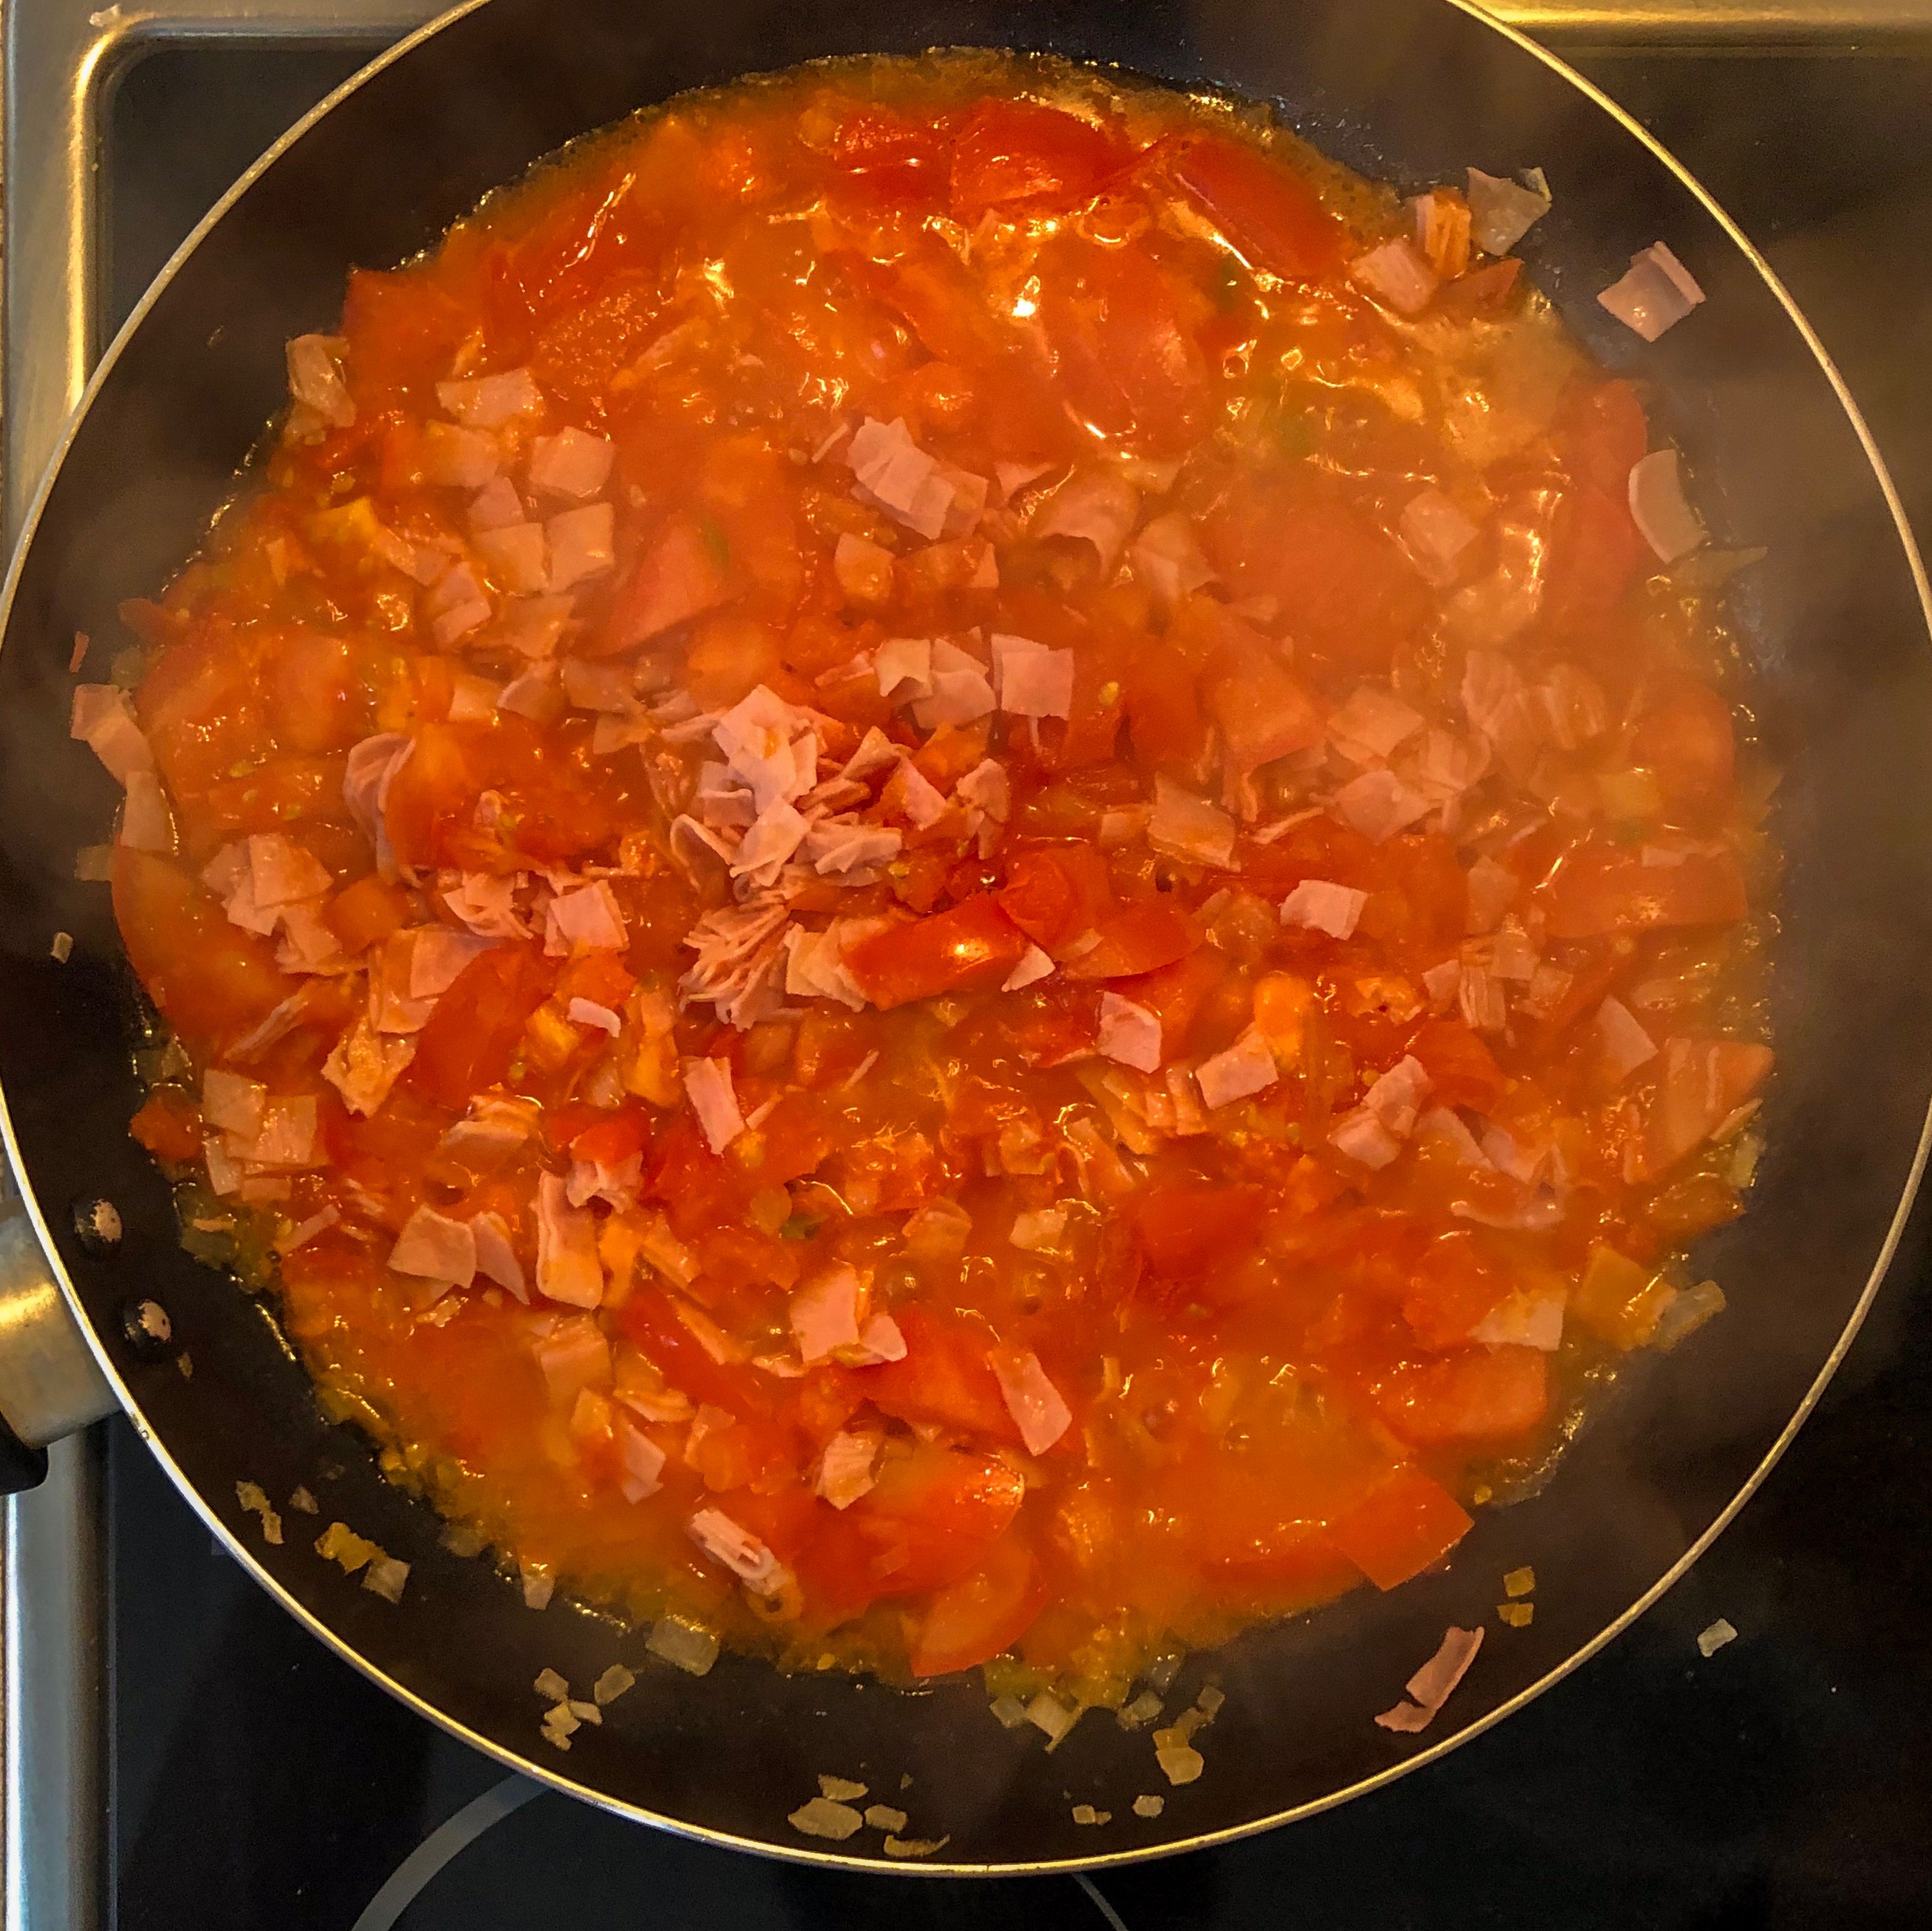 Add your tomatoes and set stove to medium low heat. When tomatoes are soften add your ham and let it cook and season with salt and pepper. Stir around on occasions.